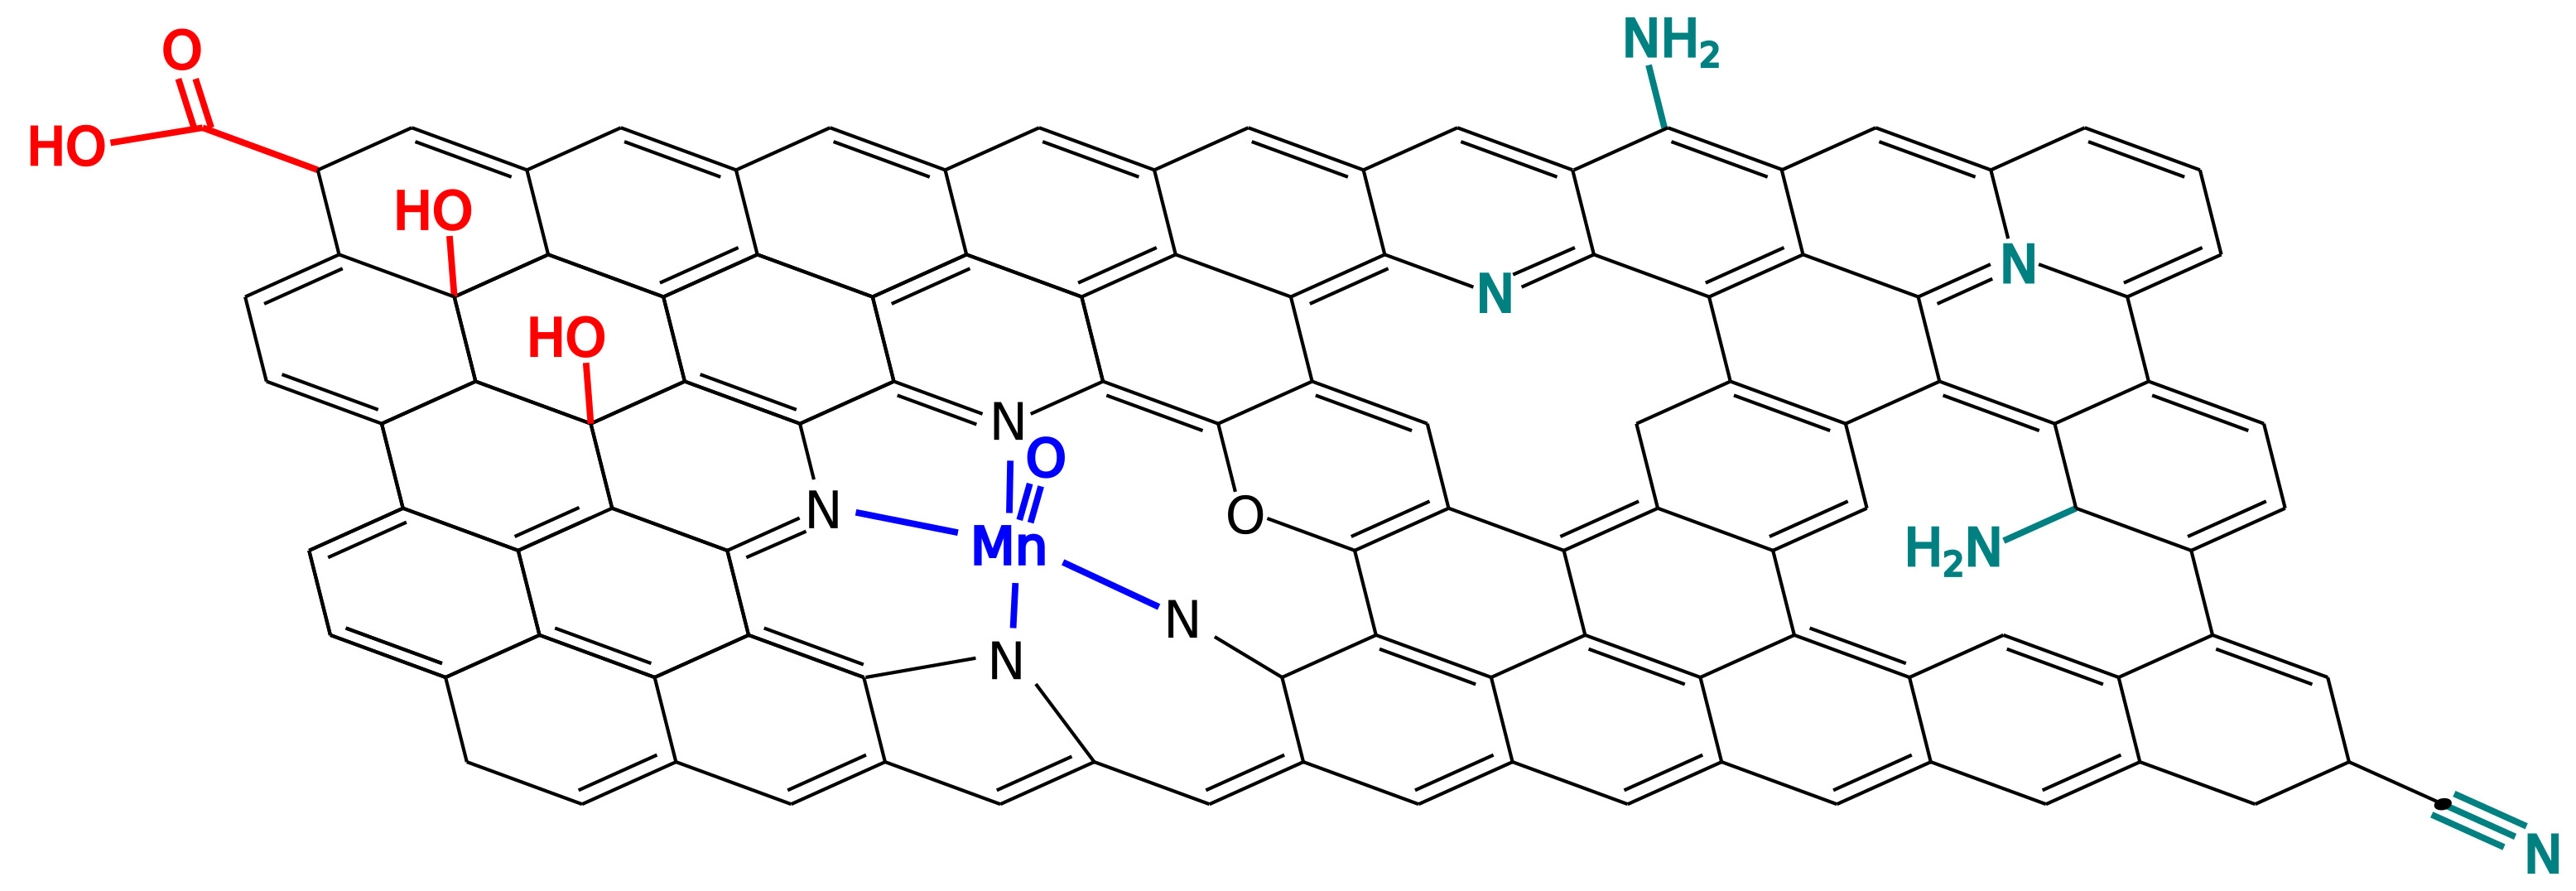 Schematic of structual drawing of graphene with defects